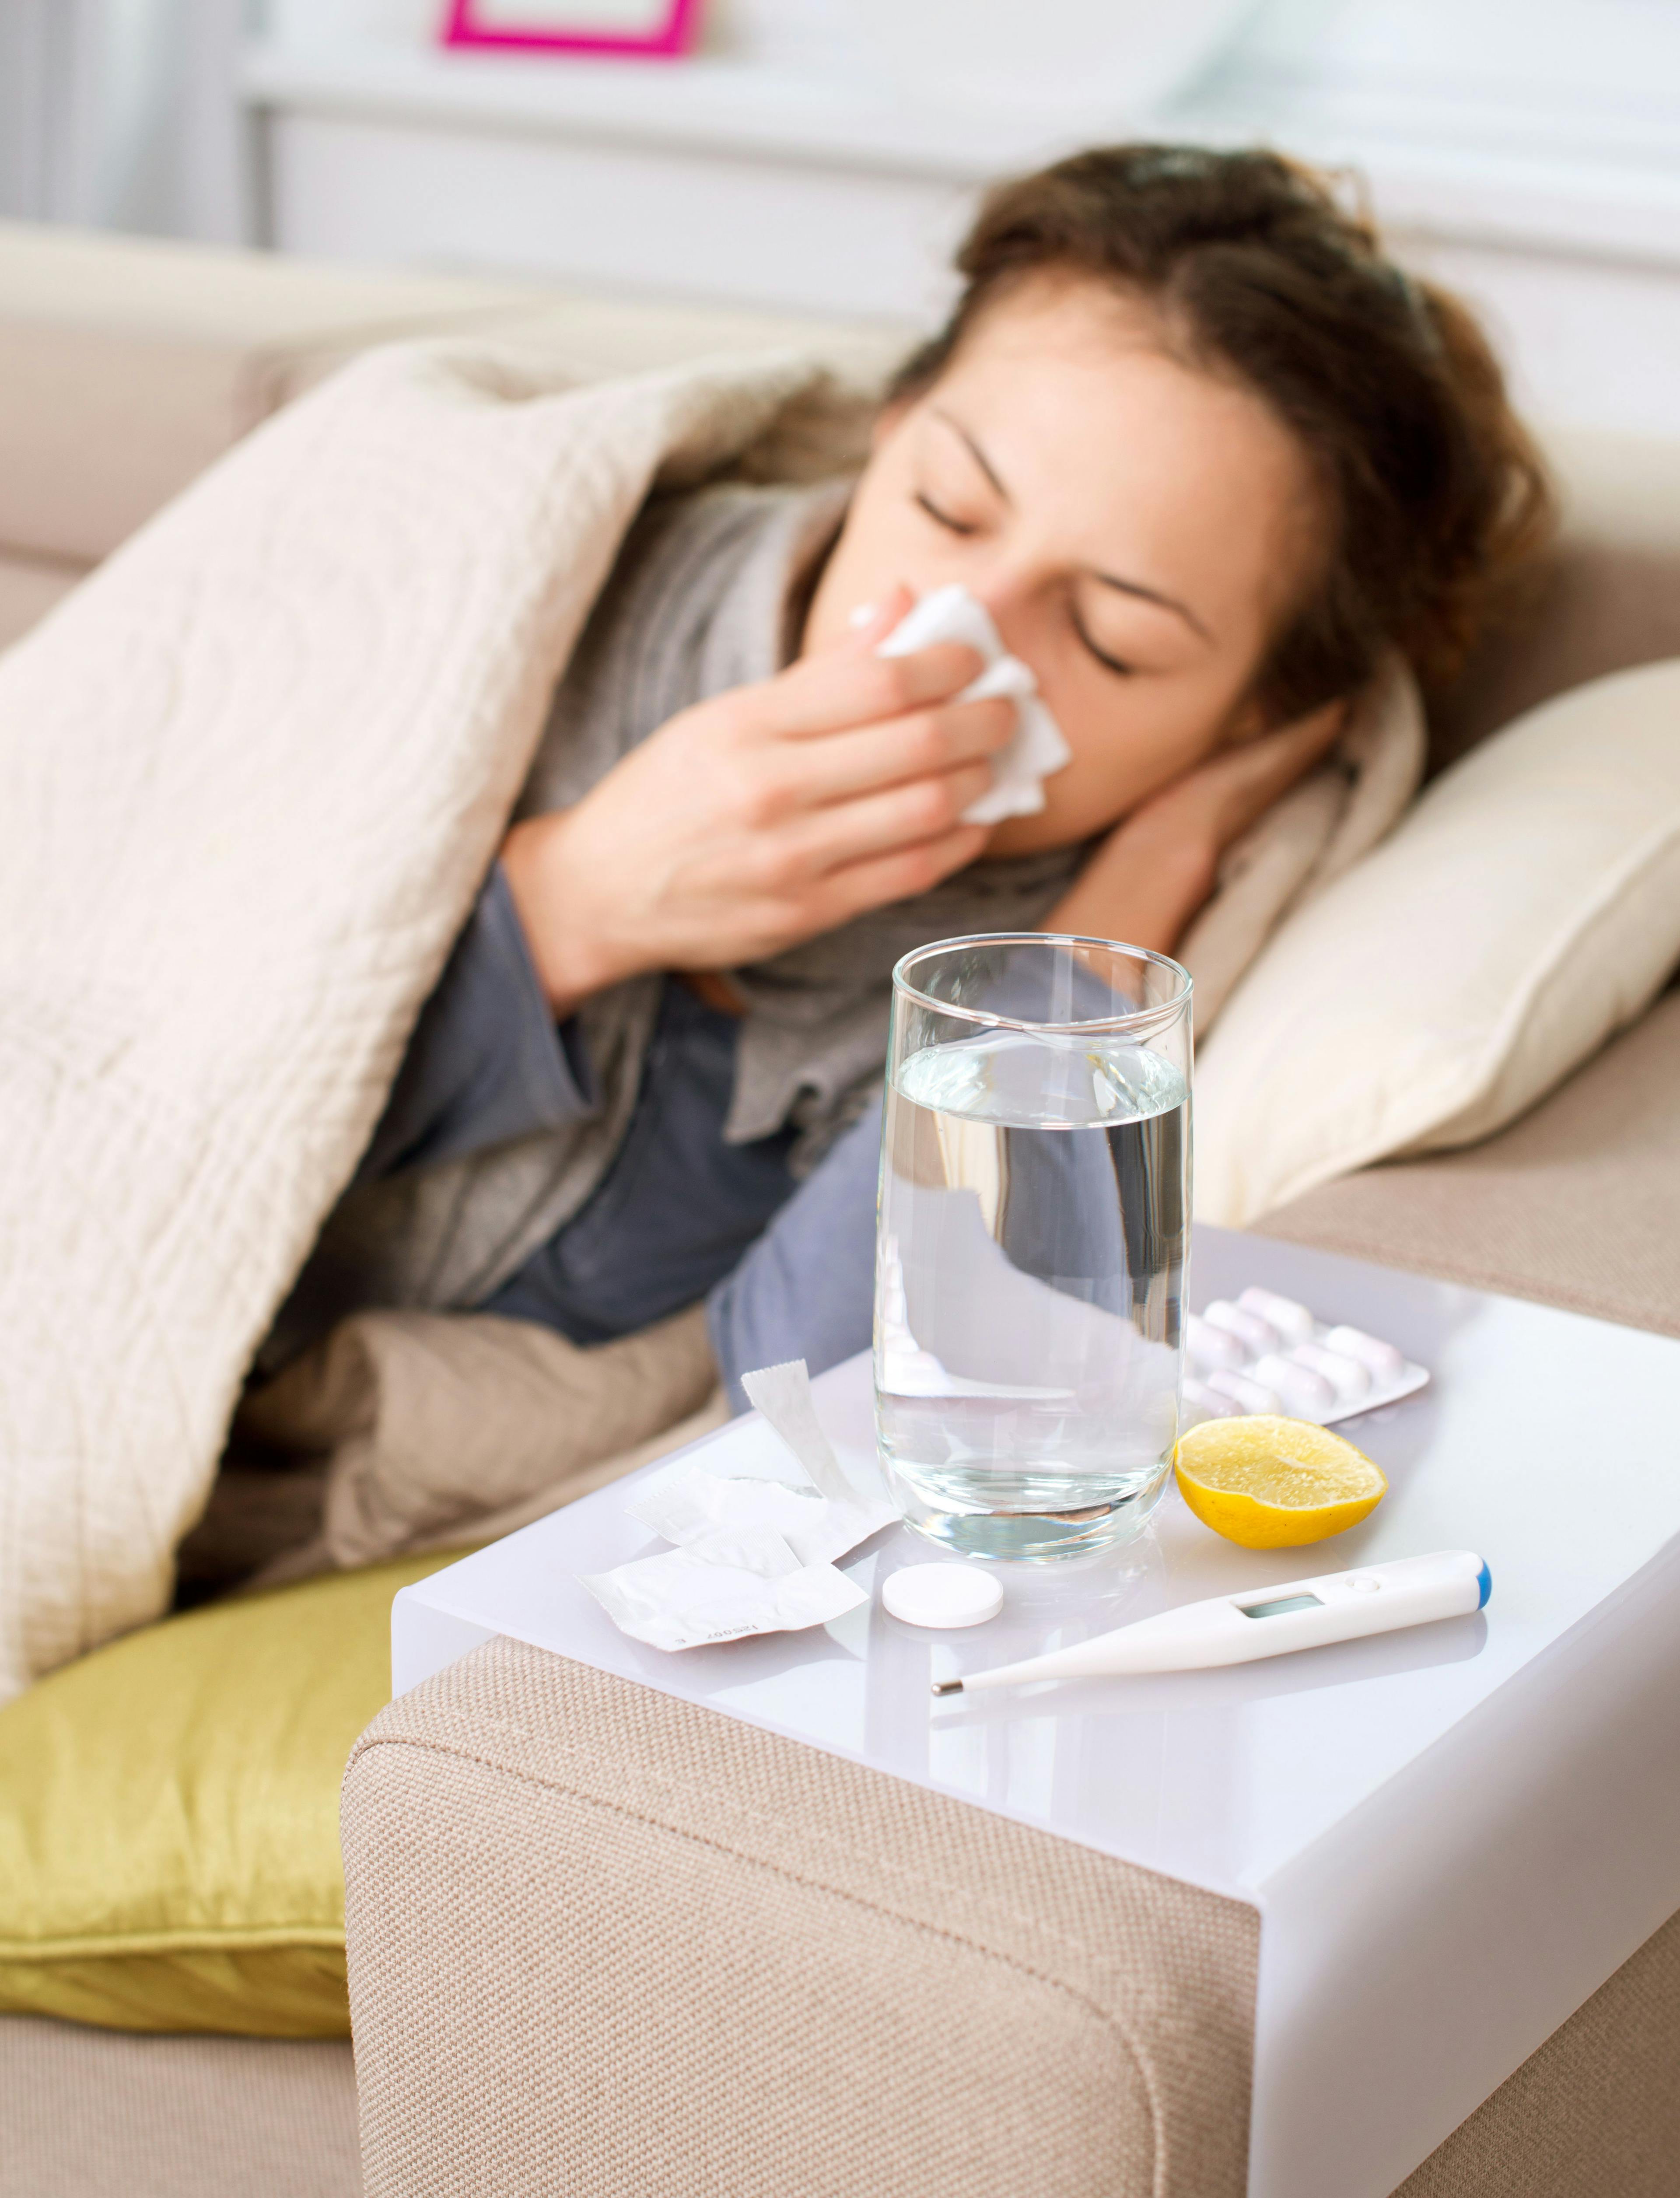 Help Treat Coughs That Linger After a Cold